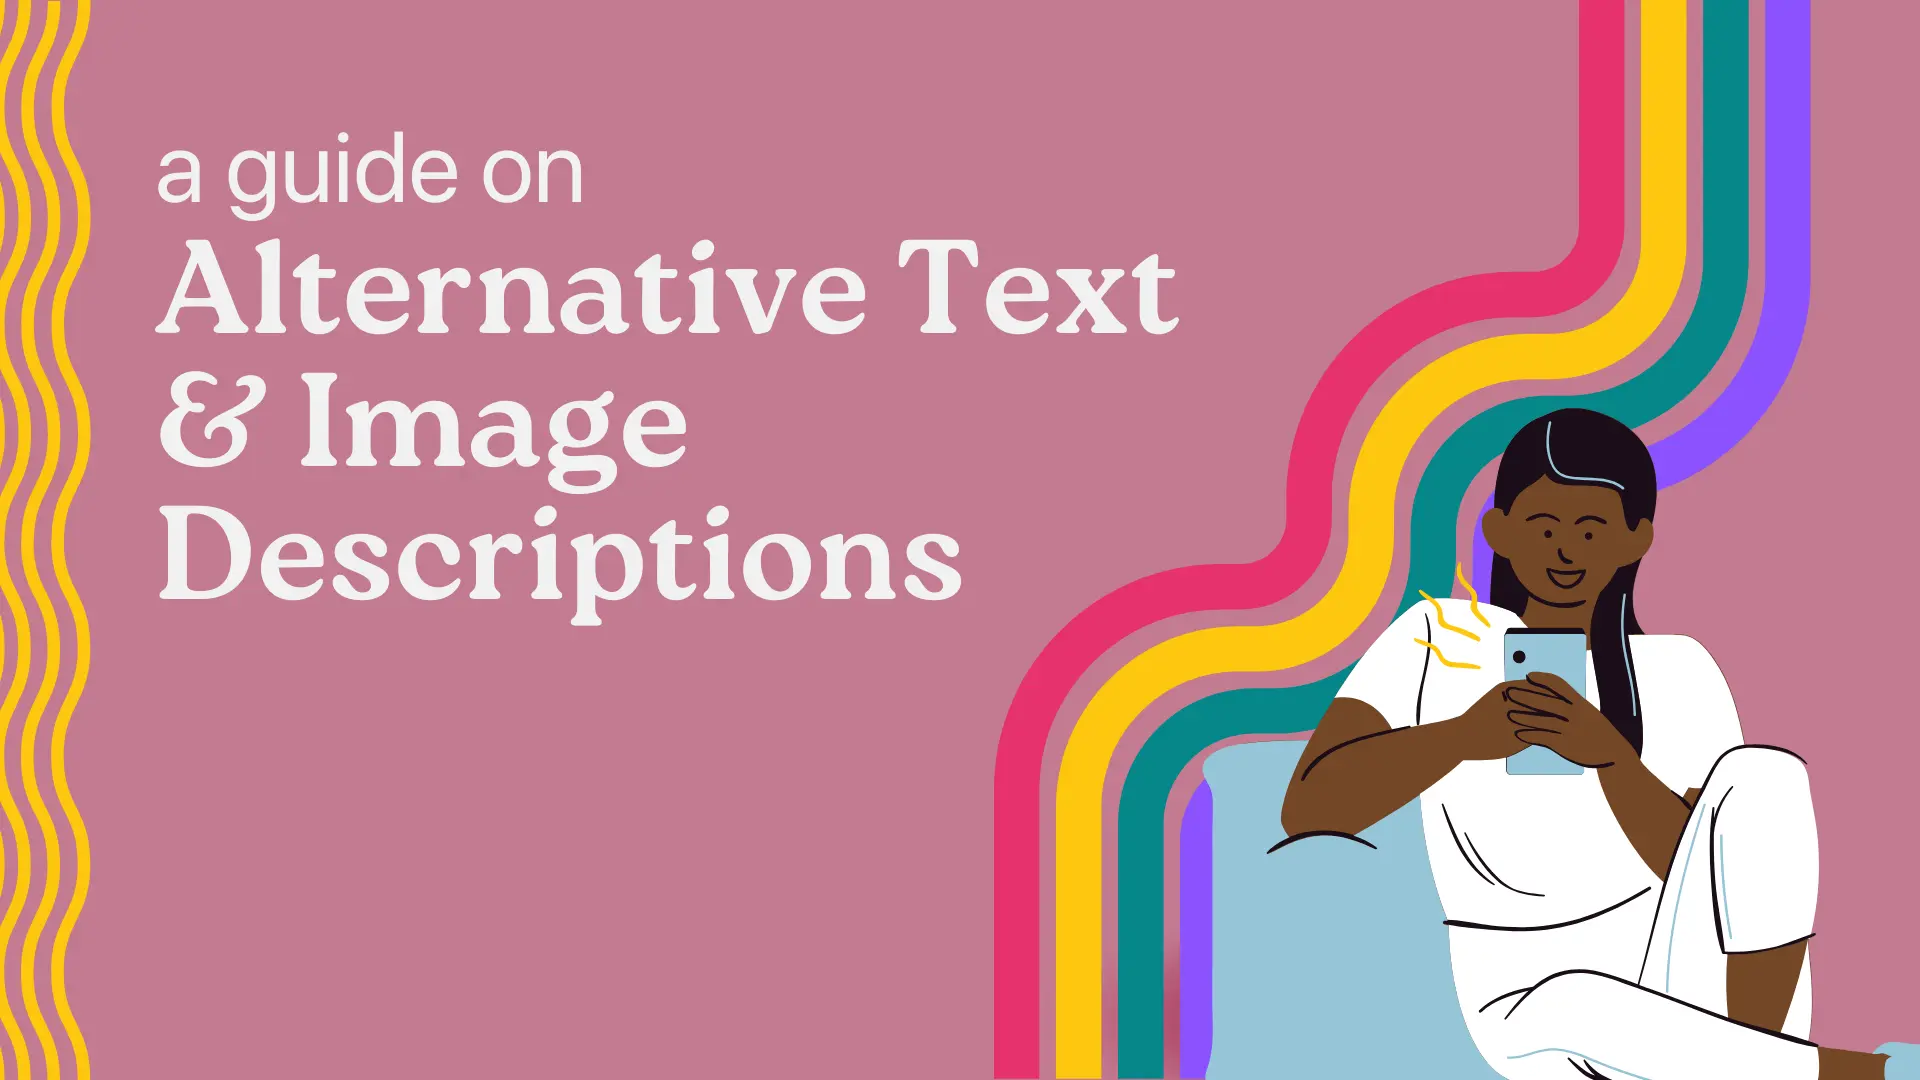 Alternative Texts and Image Descriptions: Importance and Best Practices